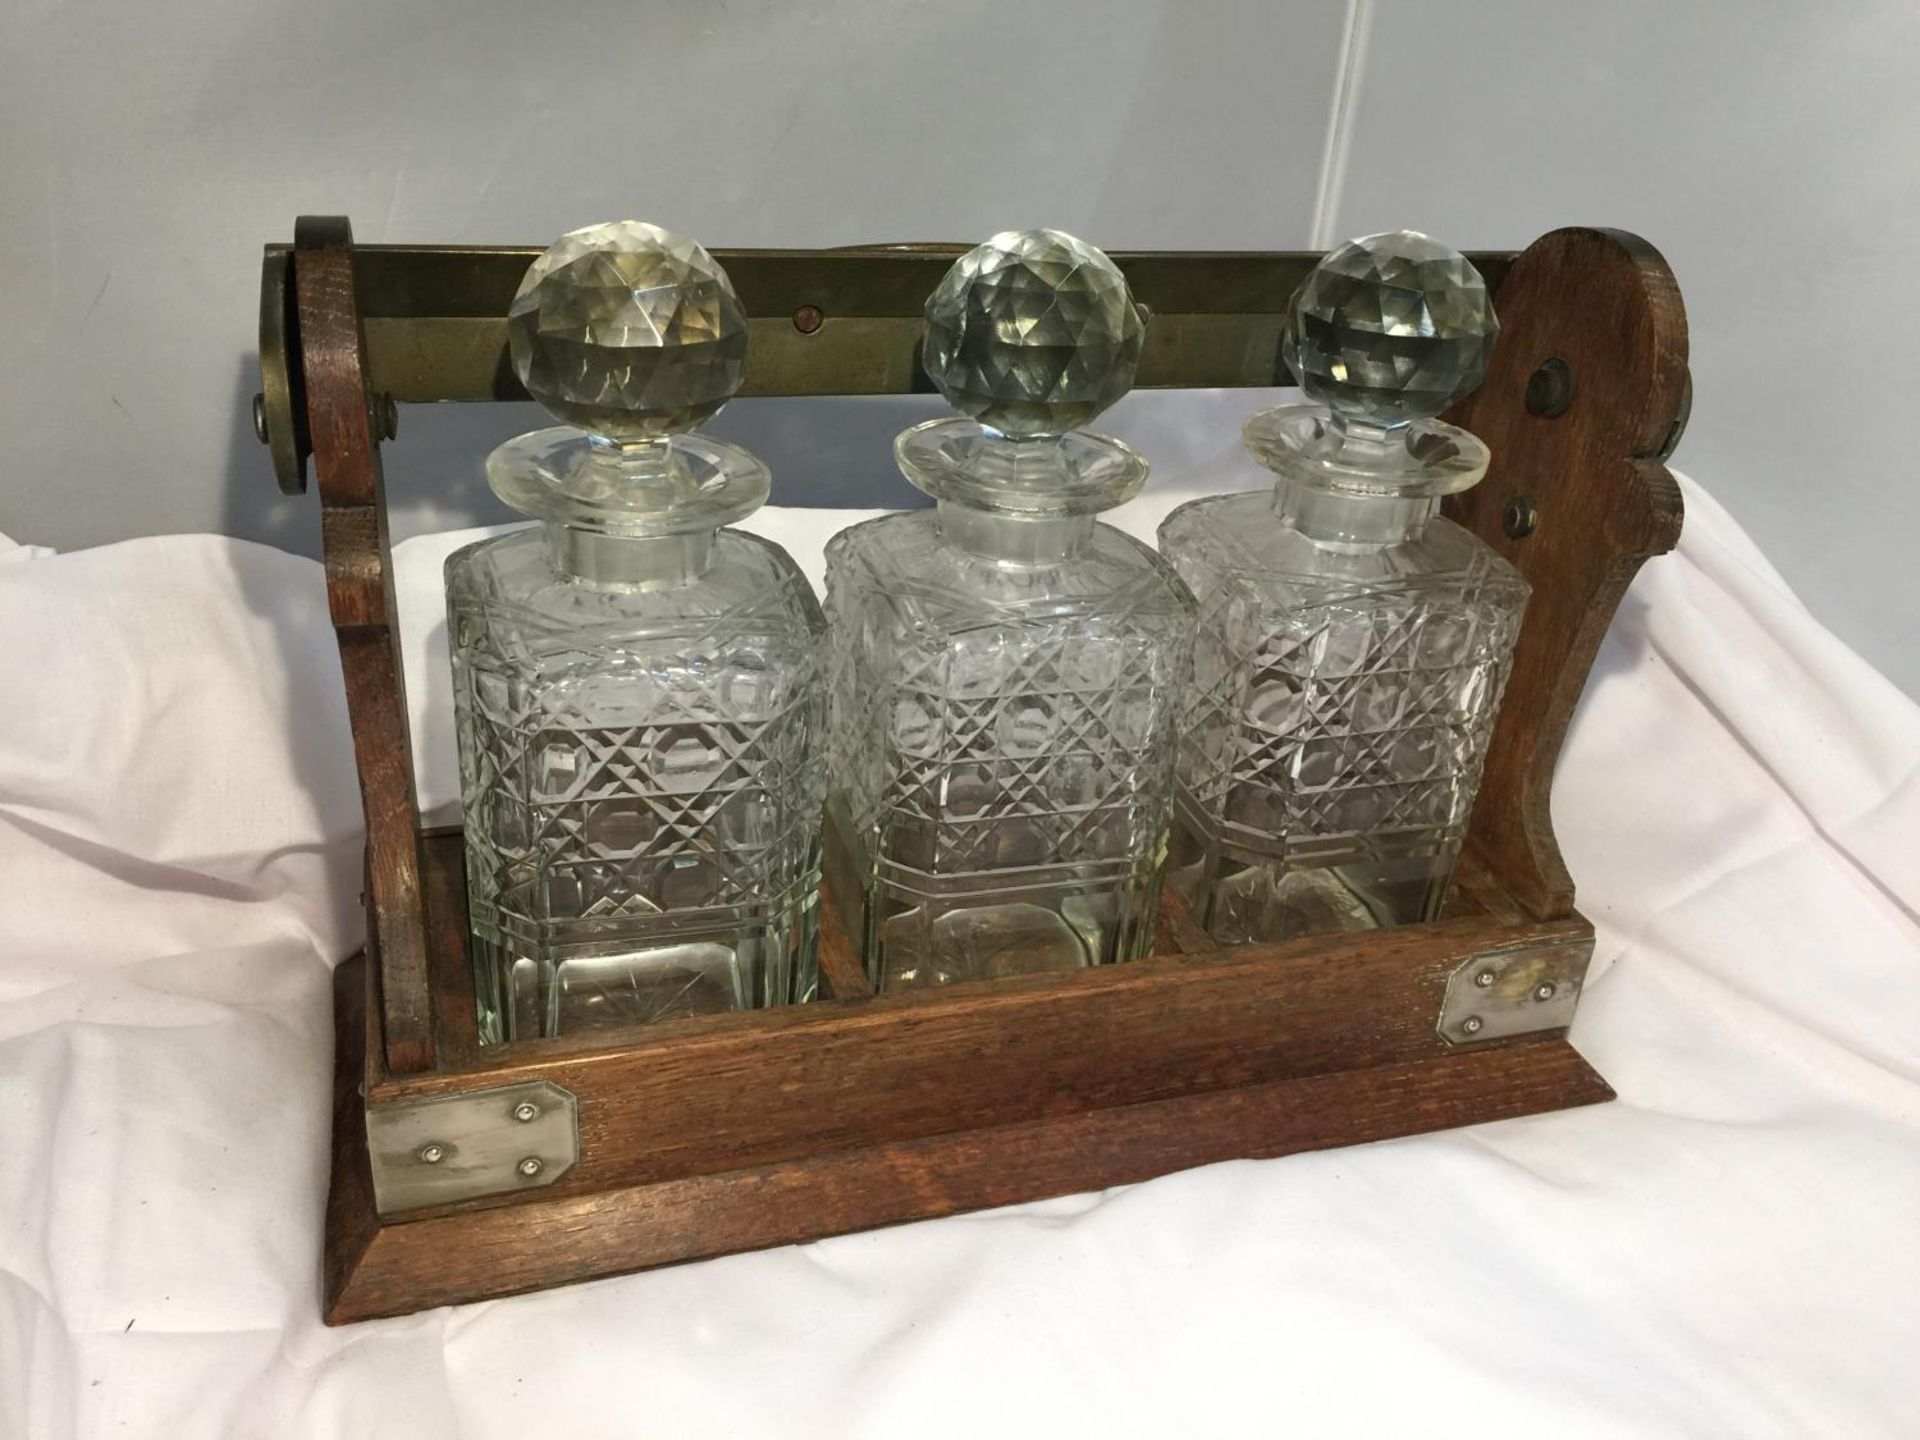 A BETJEMANN LONDON PATENT 62082 OAK FRAMED AND BRASS TANTALUS WITH THREE DECANTERS AND A KEY - Image 4 of 4